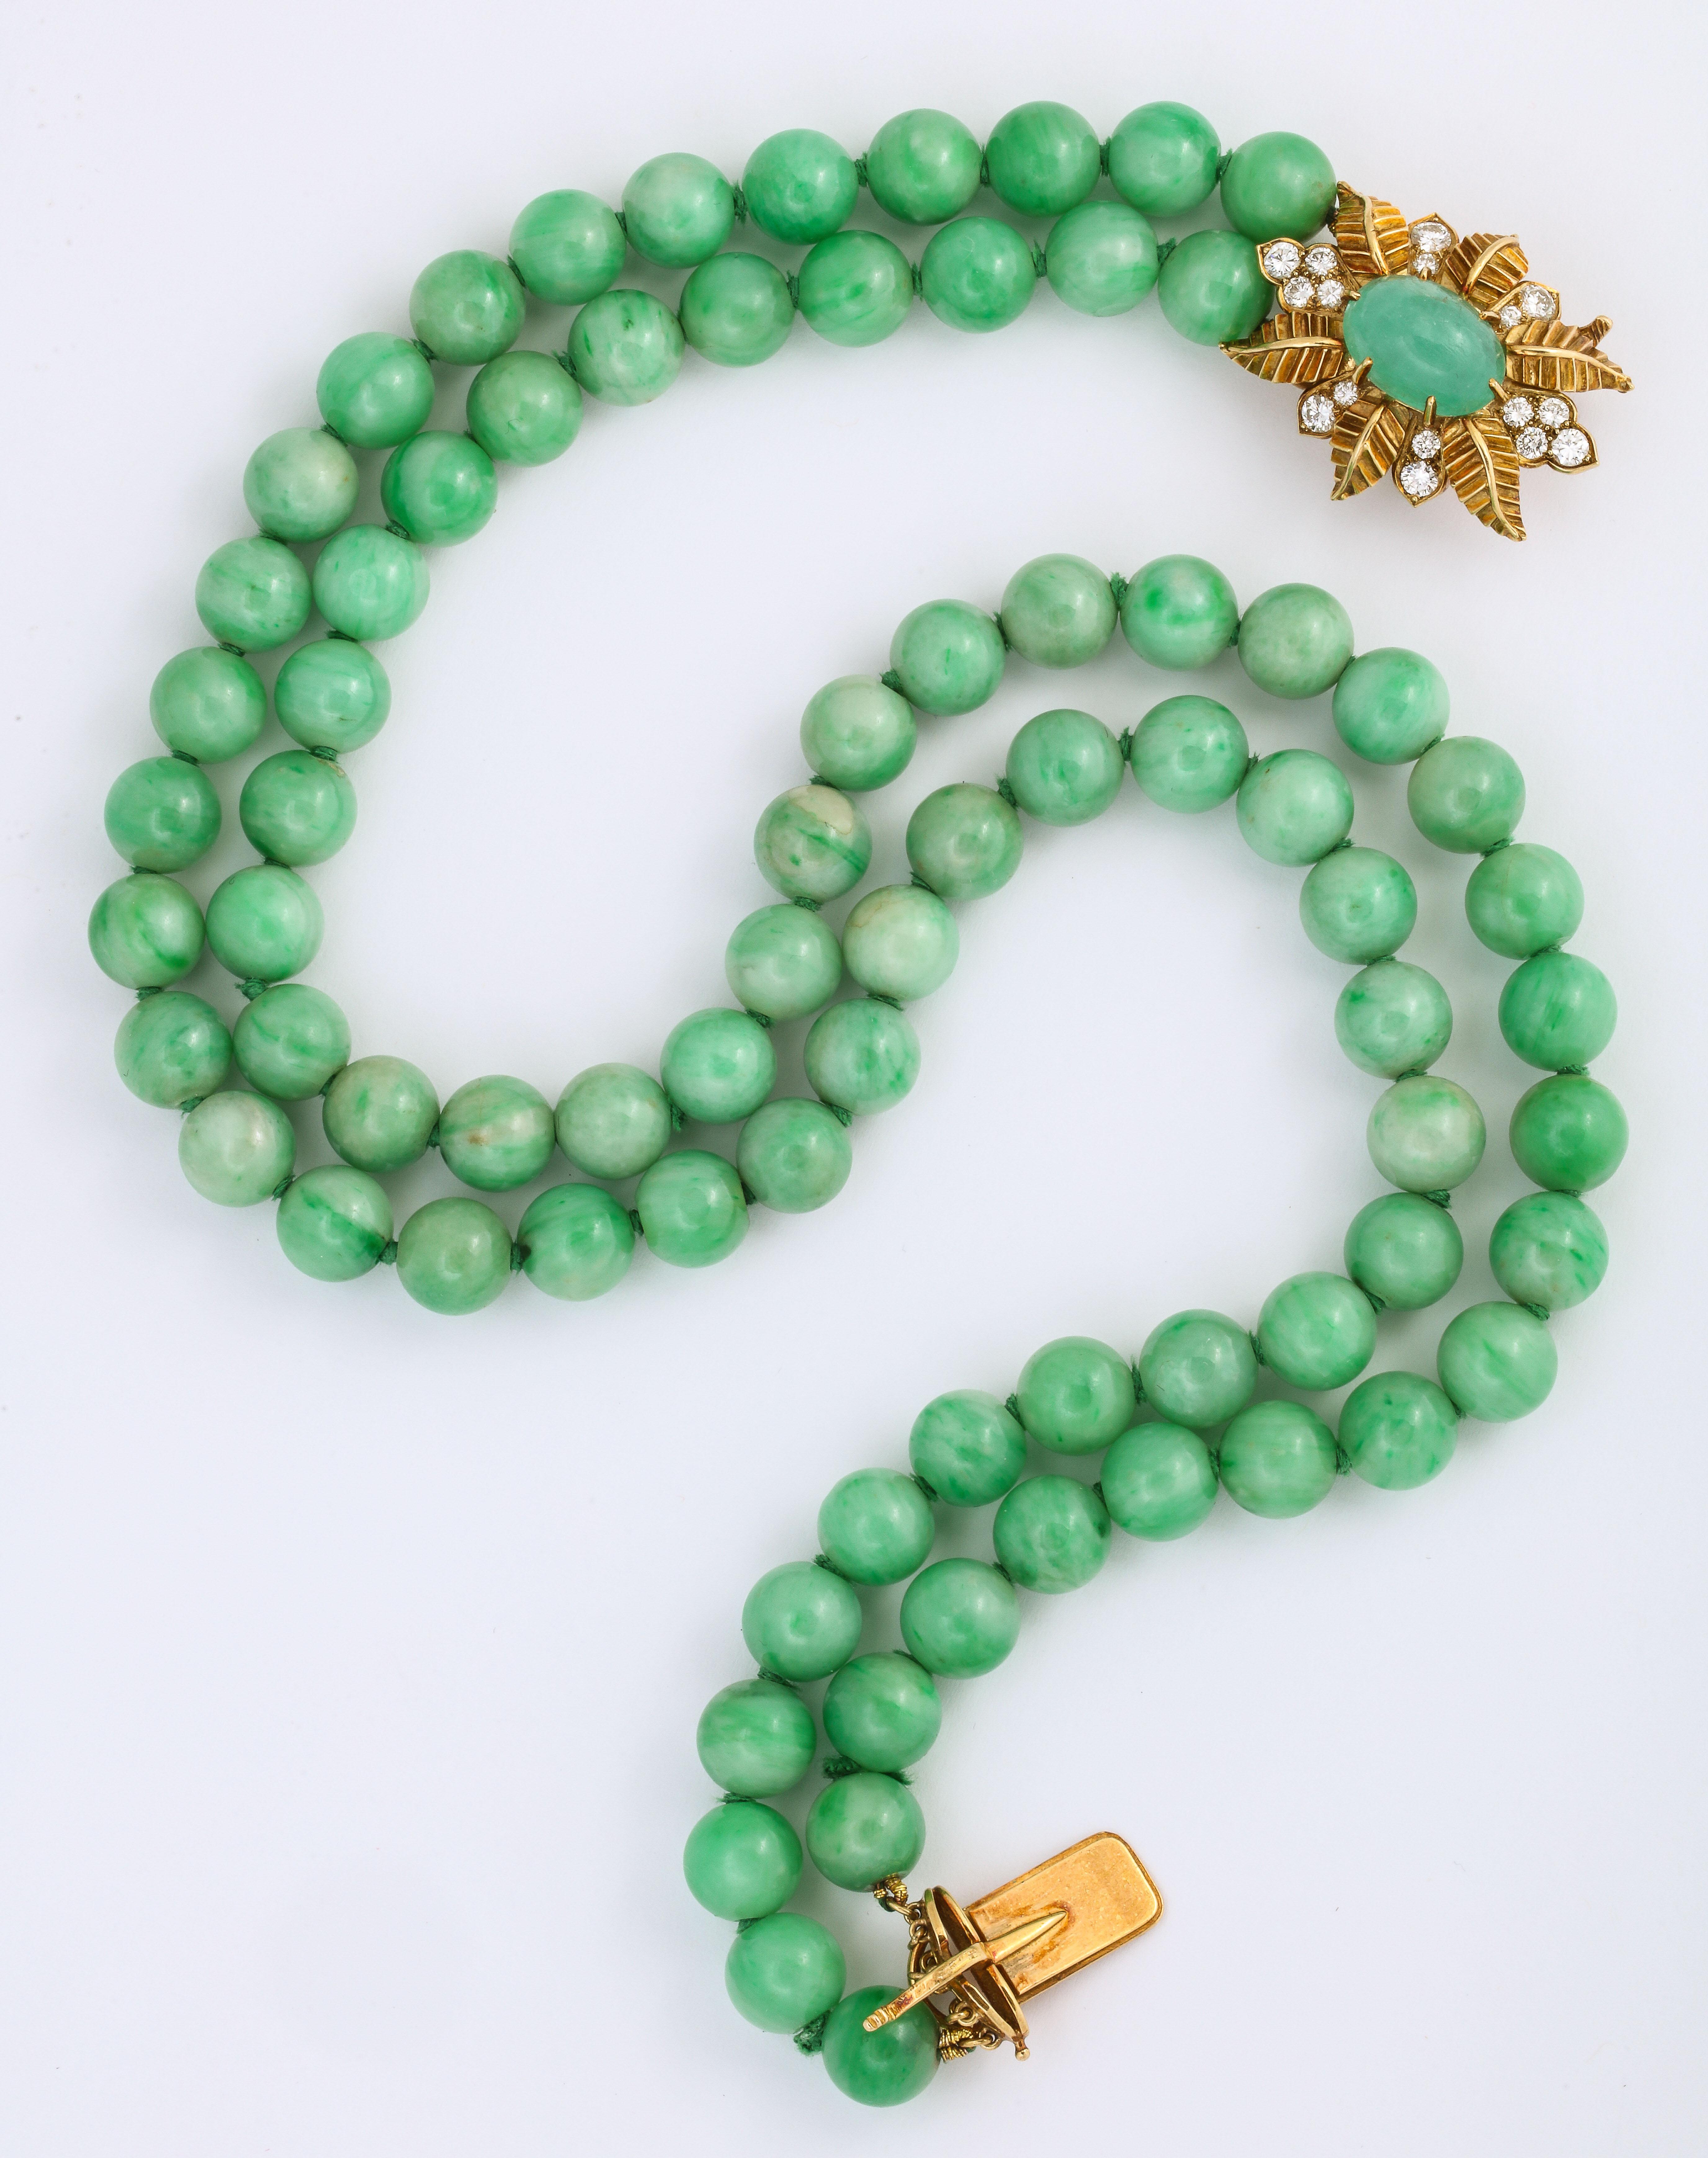 Offered is this elegant Cartier Jade Bead Choker Necklace, 16-17 inches long, circa 1950. The clasp is in a floral pattern of 16 Fine White Full Cut Diamonds at 1.50 cts tw and 87.2 dwt, set in 18K yellow gold and centered with an oval shaped jade